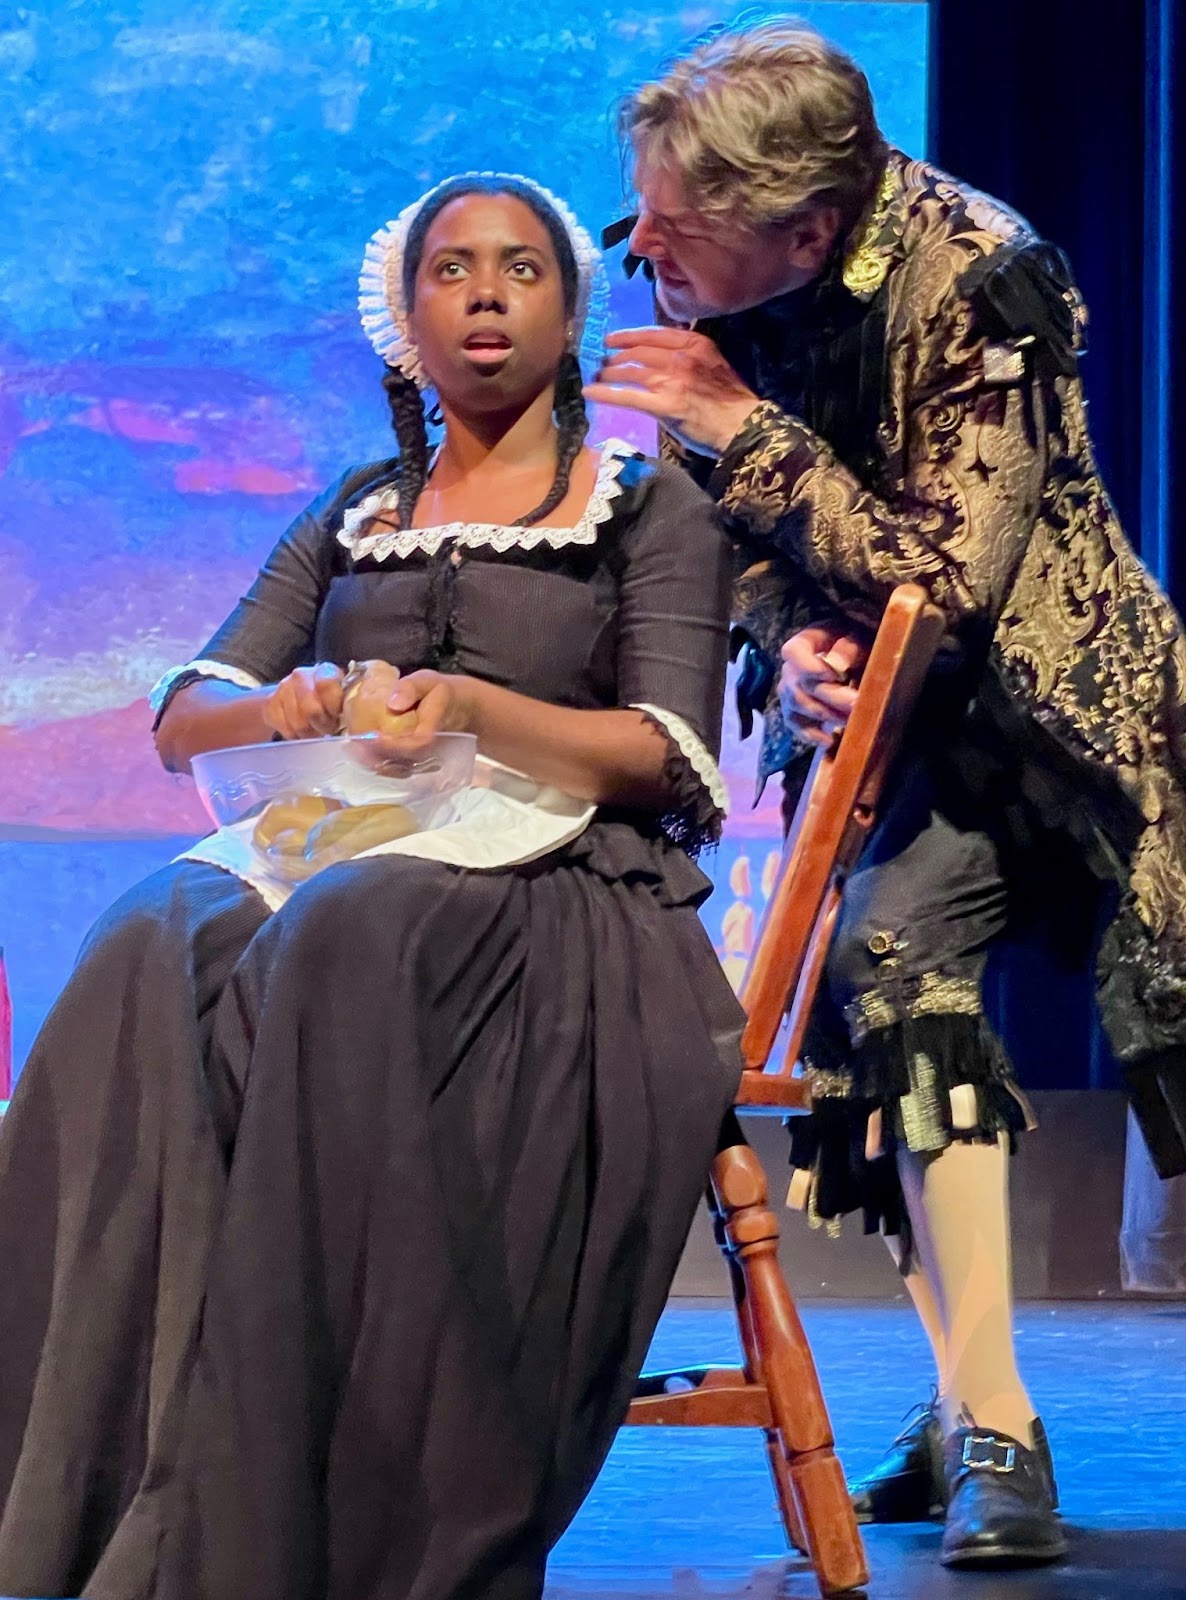 IN REVIEW: soprano KYAUNNEE RICHARDSON as Despina (left) and bass DENIS SEDOV as Don Alfonso (right) in Opera in Williamsburg's 2022 production of Wolfgang Amadeus Mozart's COSÌ FAN TUTTE [Photograph by Roxane Revon, © by Opera in Williamsburg]